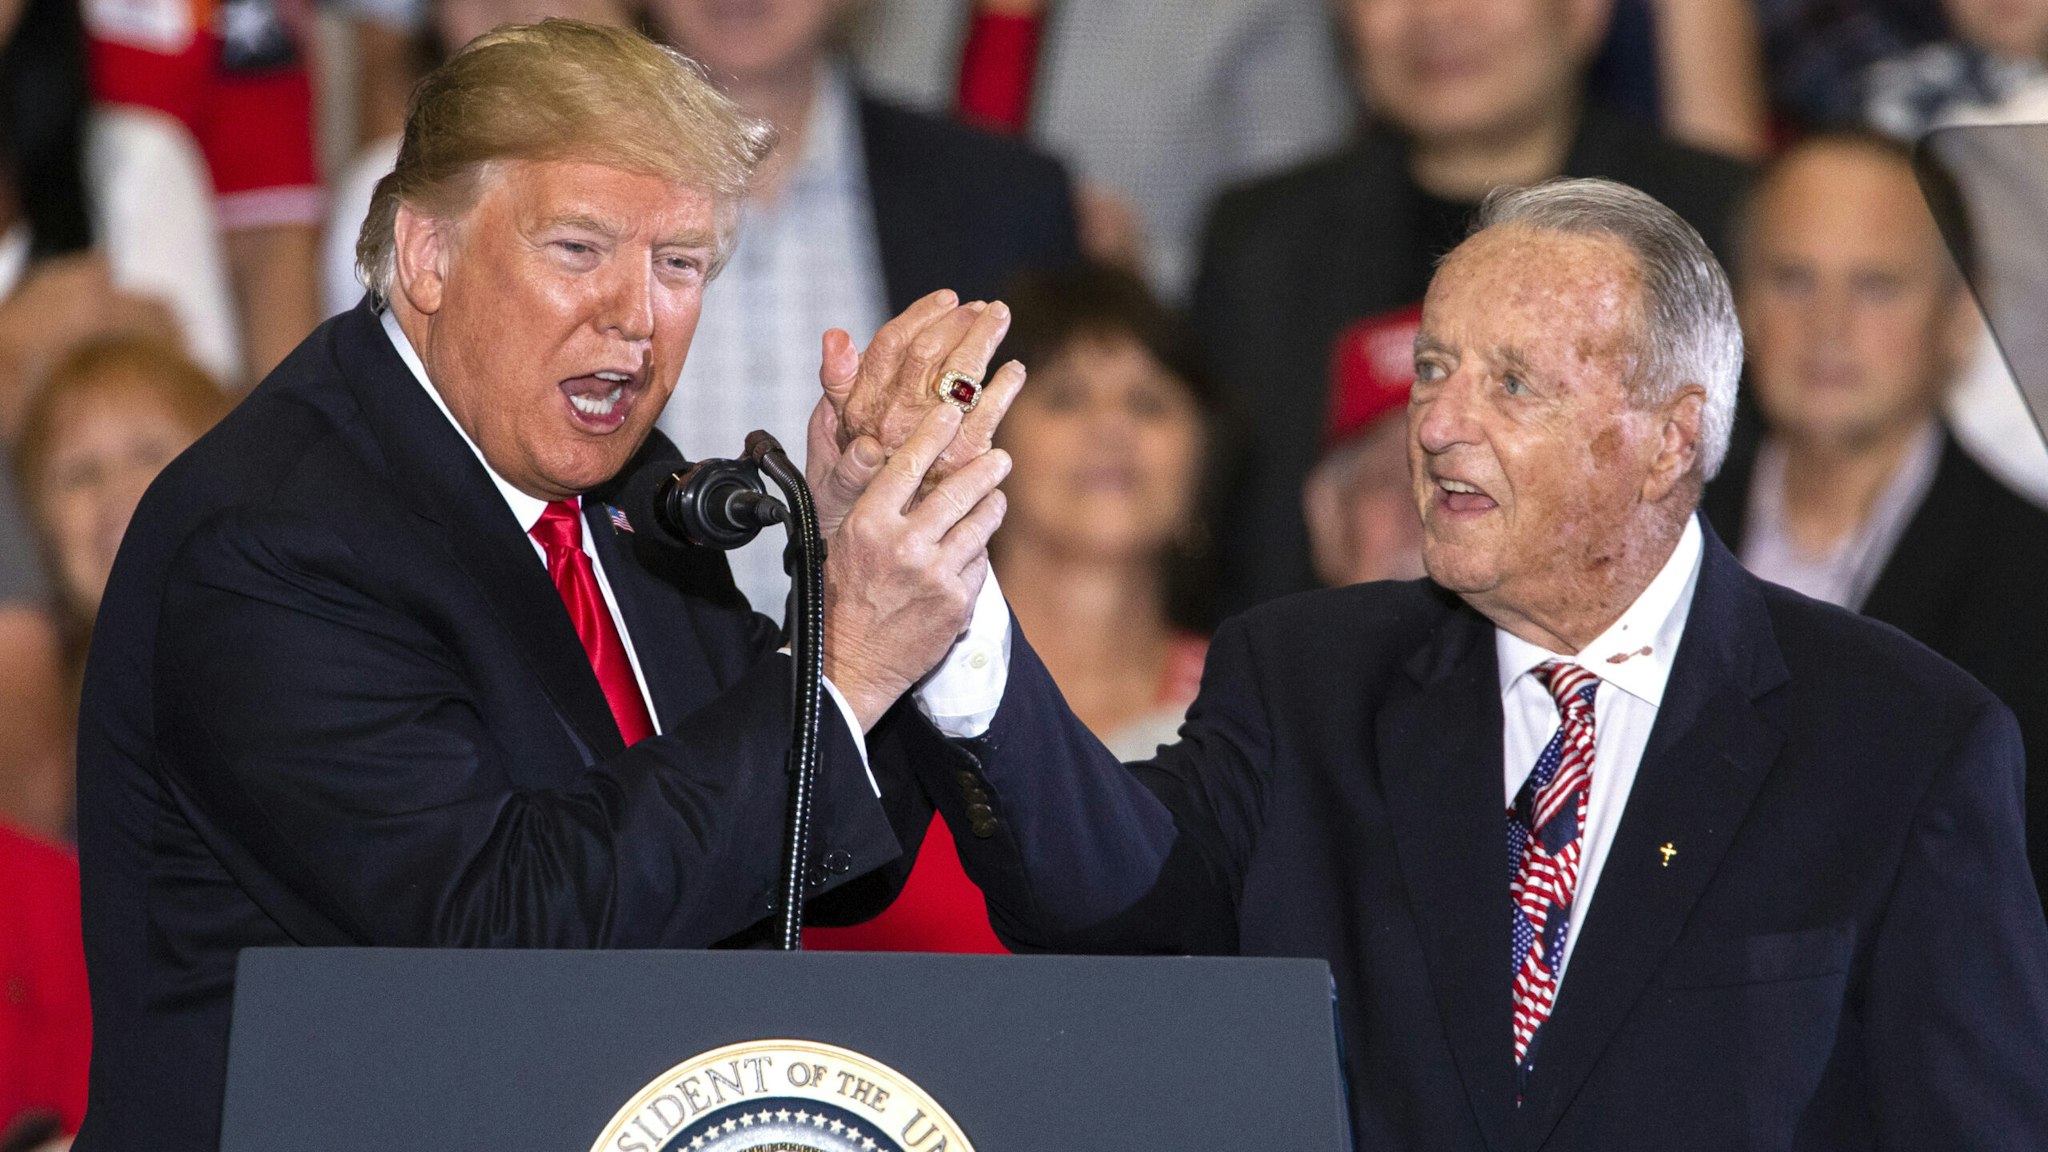 PENSACOLA, FL - NOVEMBER 03: Legendary Florida State University head football coach Bobby Bowden is introduced by U.S. President Donald Trump at a campaign rally at the Pensacola International Airport on November 3, 2018 in Pensacola, Florida. President Trump is campaigning in support of Republican candidates in the upcoming midterm elections.